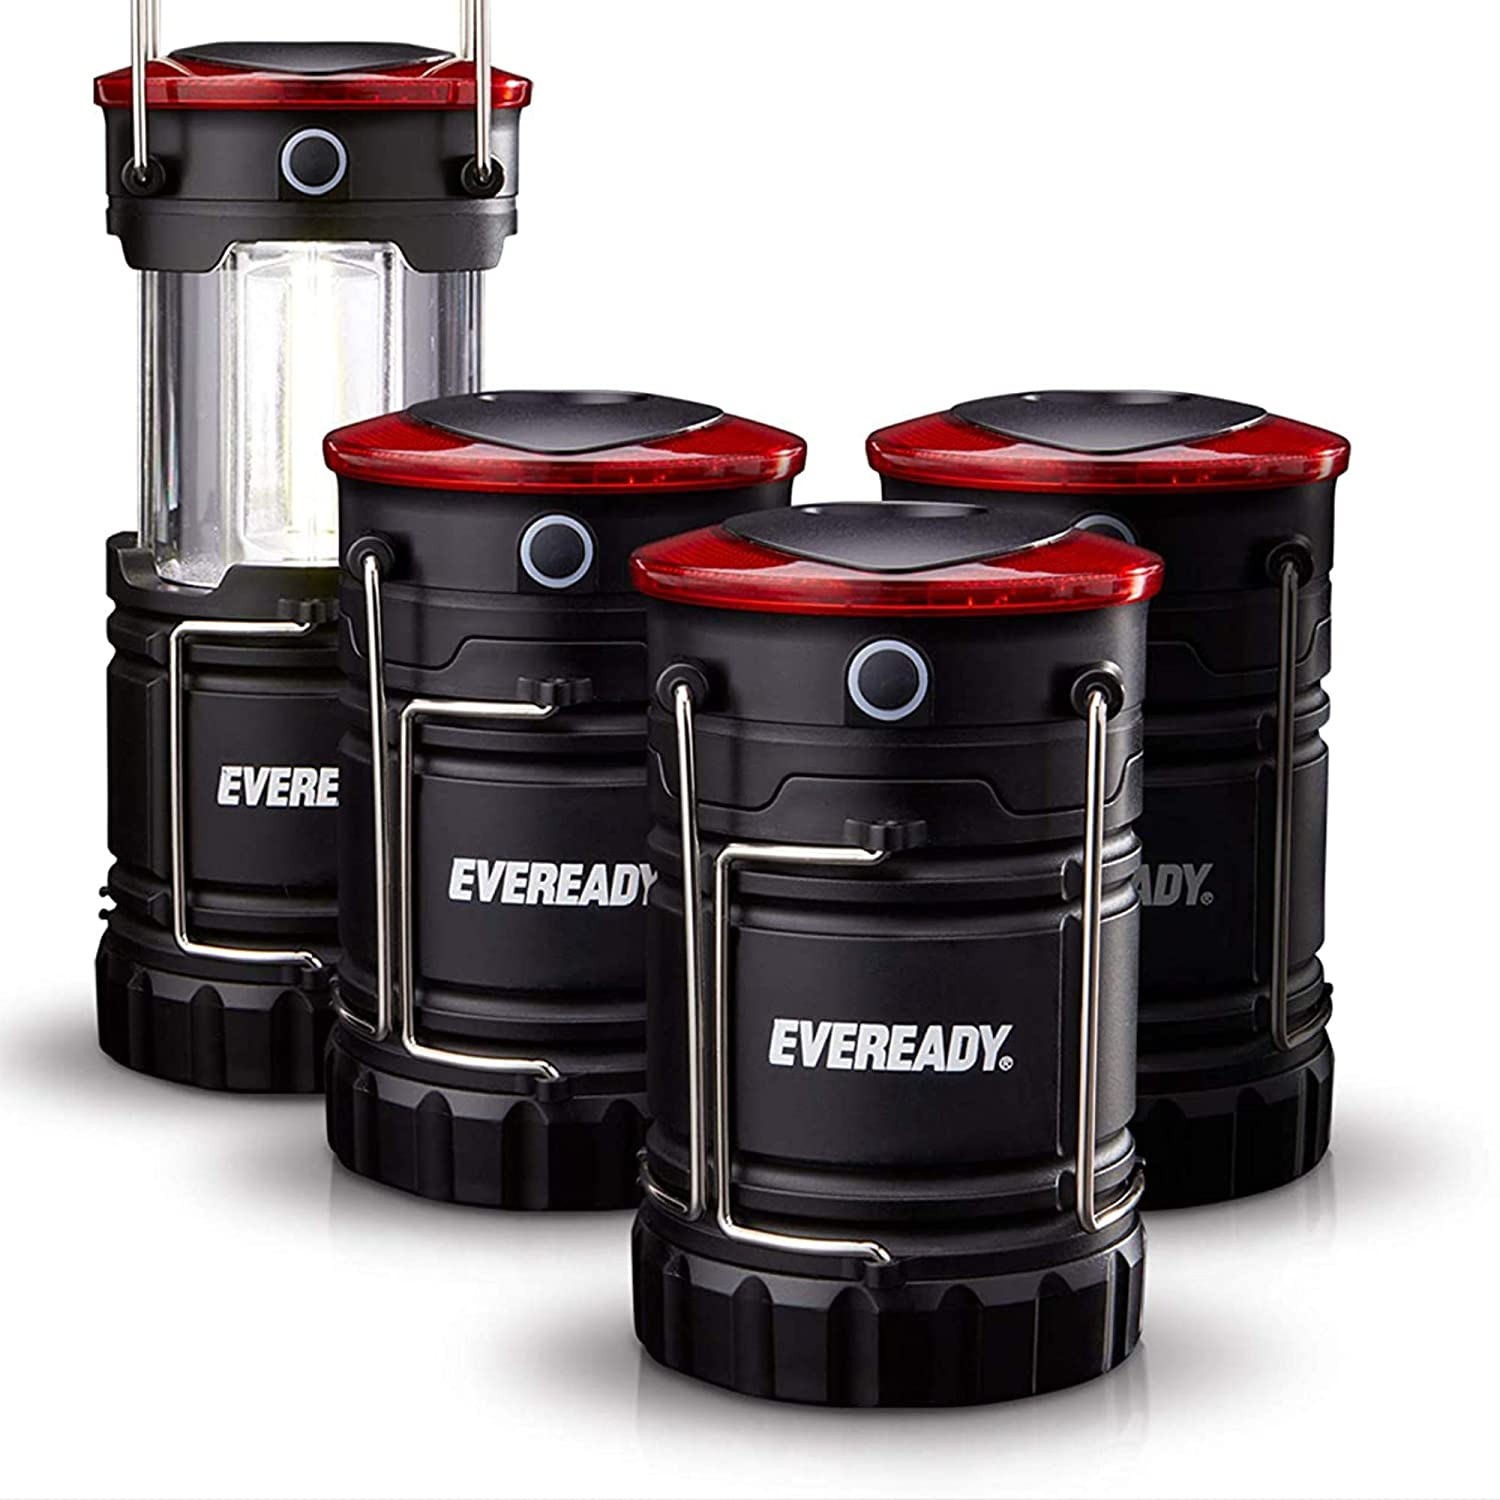 Eveready LED Camping Lantern 360 PRO (4-Pack), Super Bright Tent Lights, Rugged Water Resistant LED Lanterns, 100 Hour Run-time (Batteries Included) $14.04